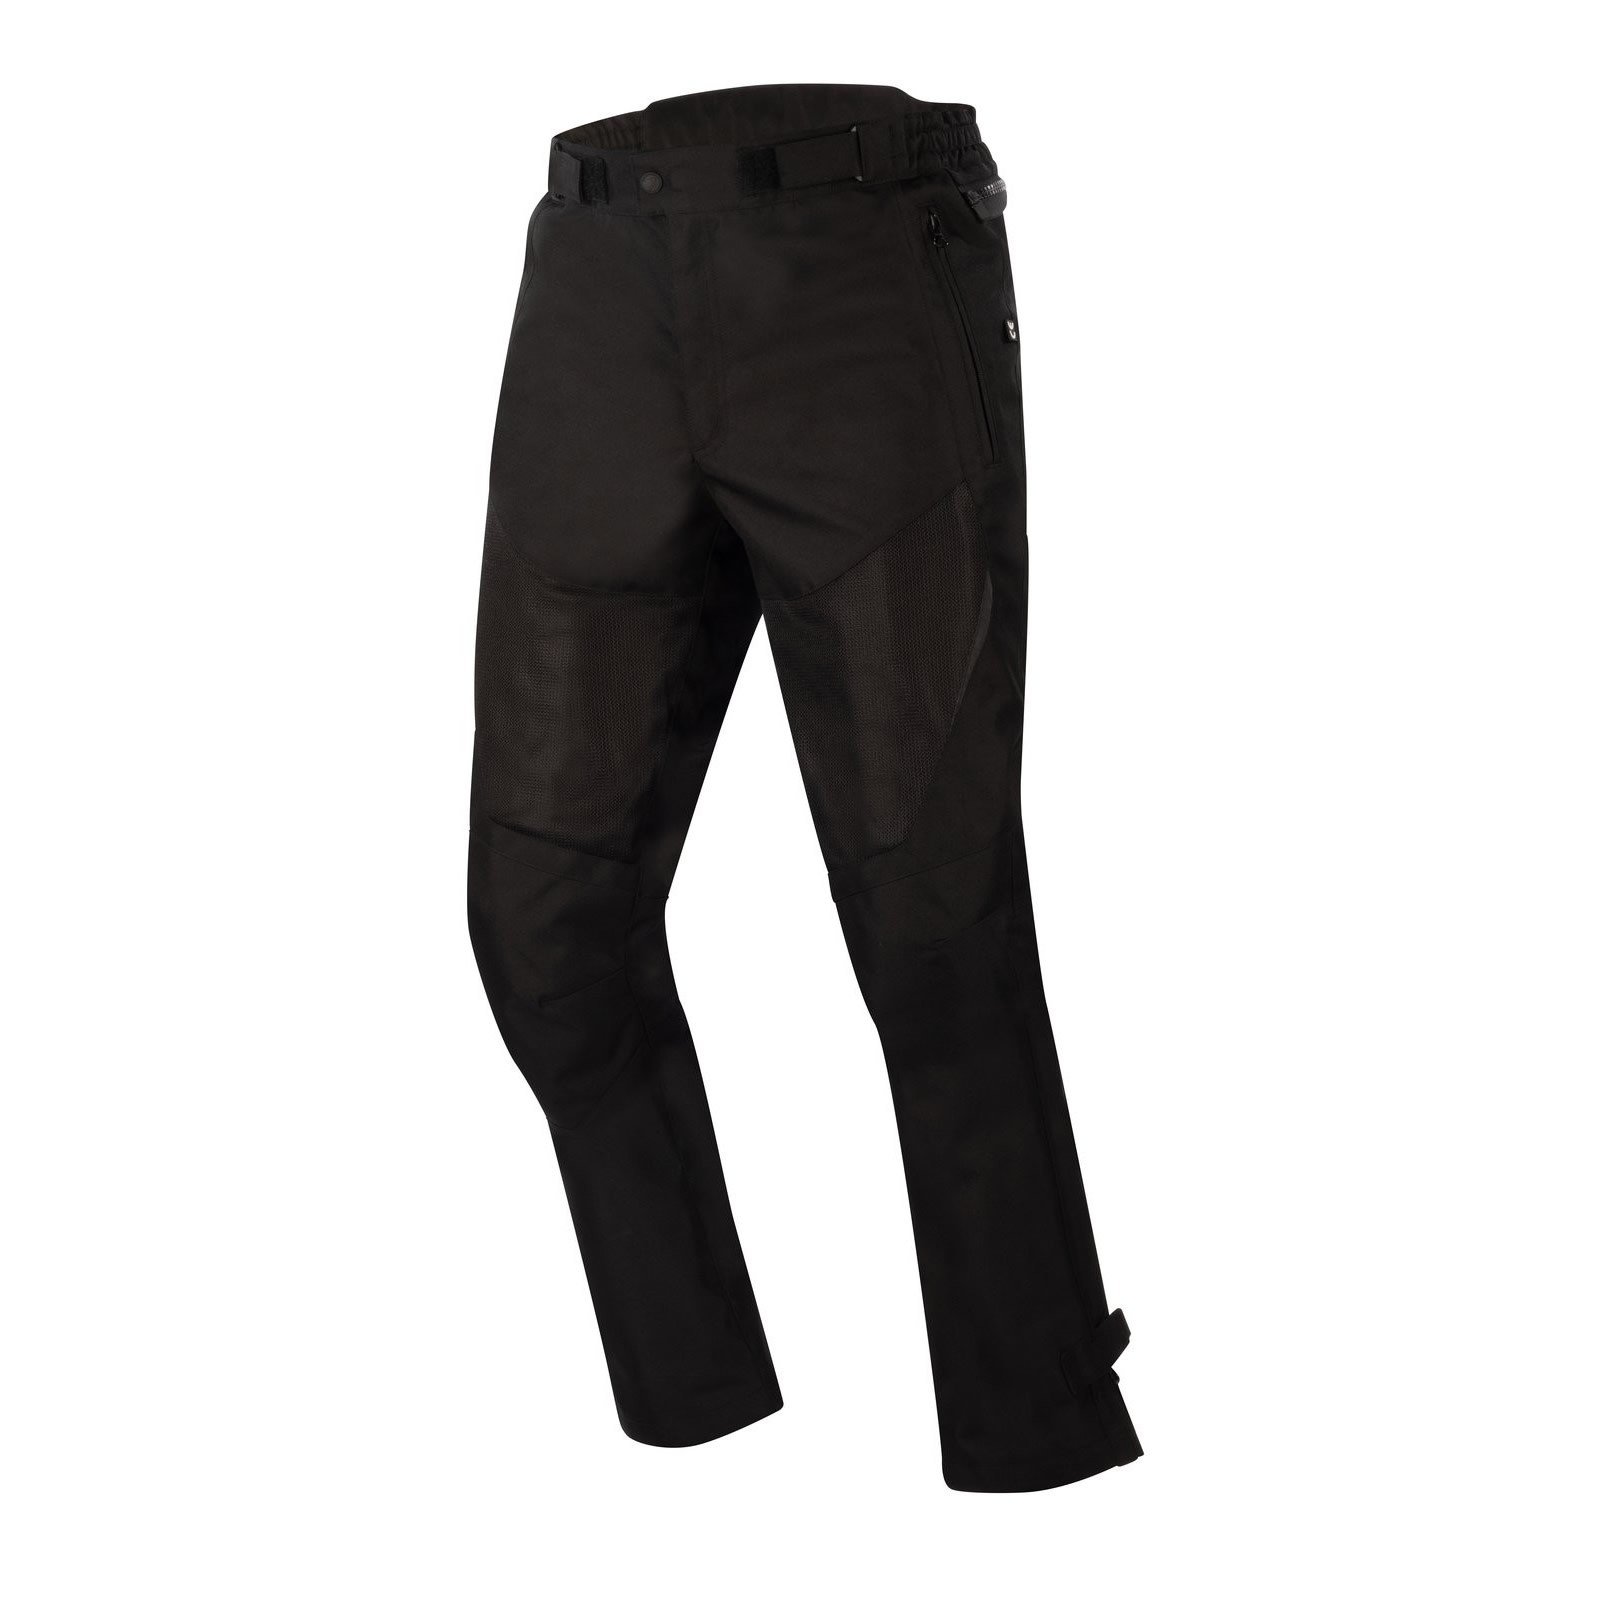 Image of Bering Twister Black Pants Size M ID 3660815162354